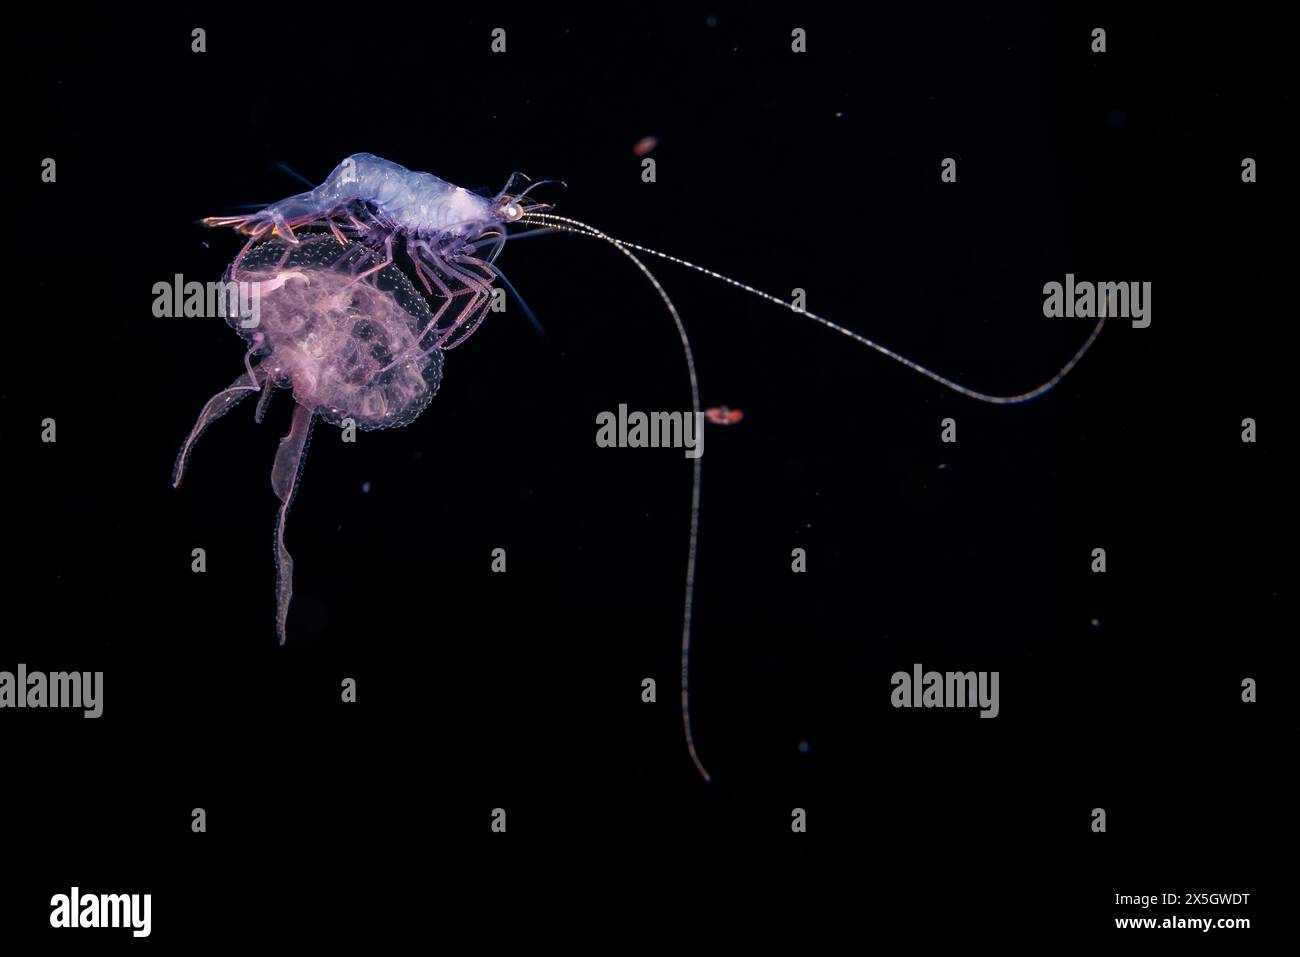 The larval stage of a shrimp riding a luminescent jellyfish, Pelagia noctiluca, Yap, Micronesia. Shot on a blackwater dive one mile into open ocean at Stock Photo